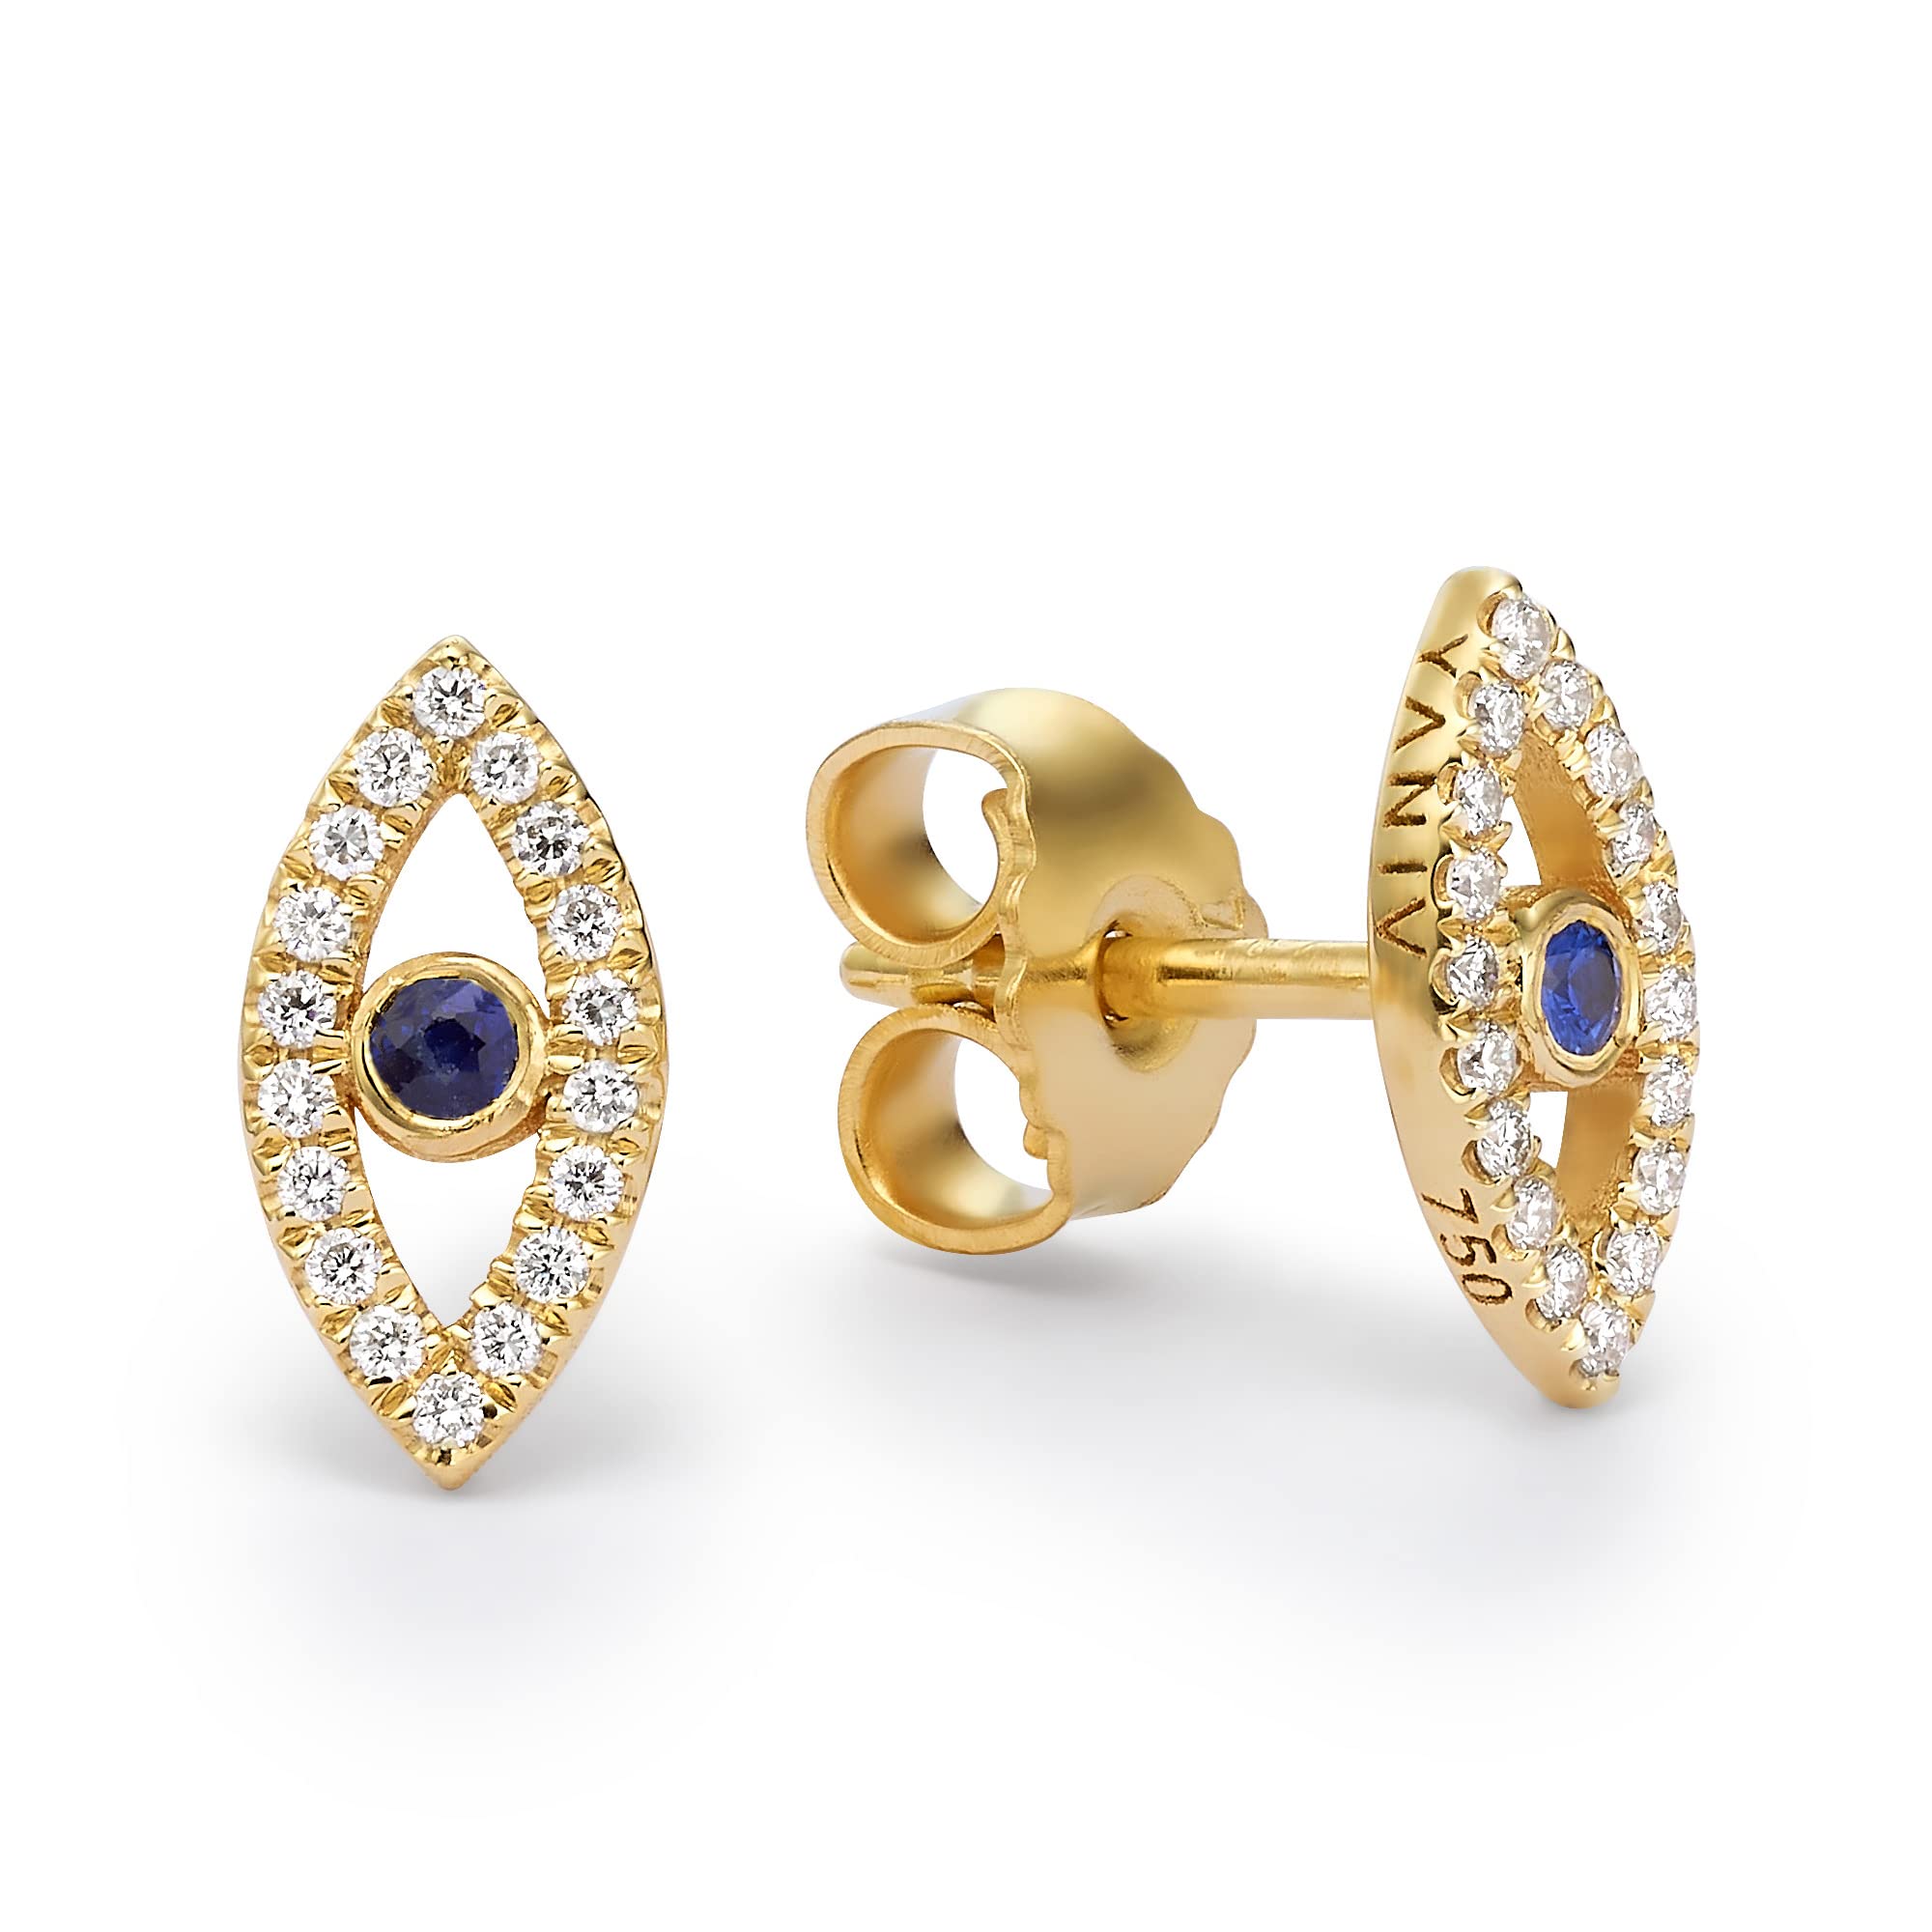 0.15 Carat Diamond and Blue Sapphire Evil Eye Stud Earrings for Women in 18k Gold (D-F, VS1-VS2, cttw) Puch Back Jewish Jewelry by Baltinester Jewelry